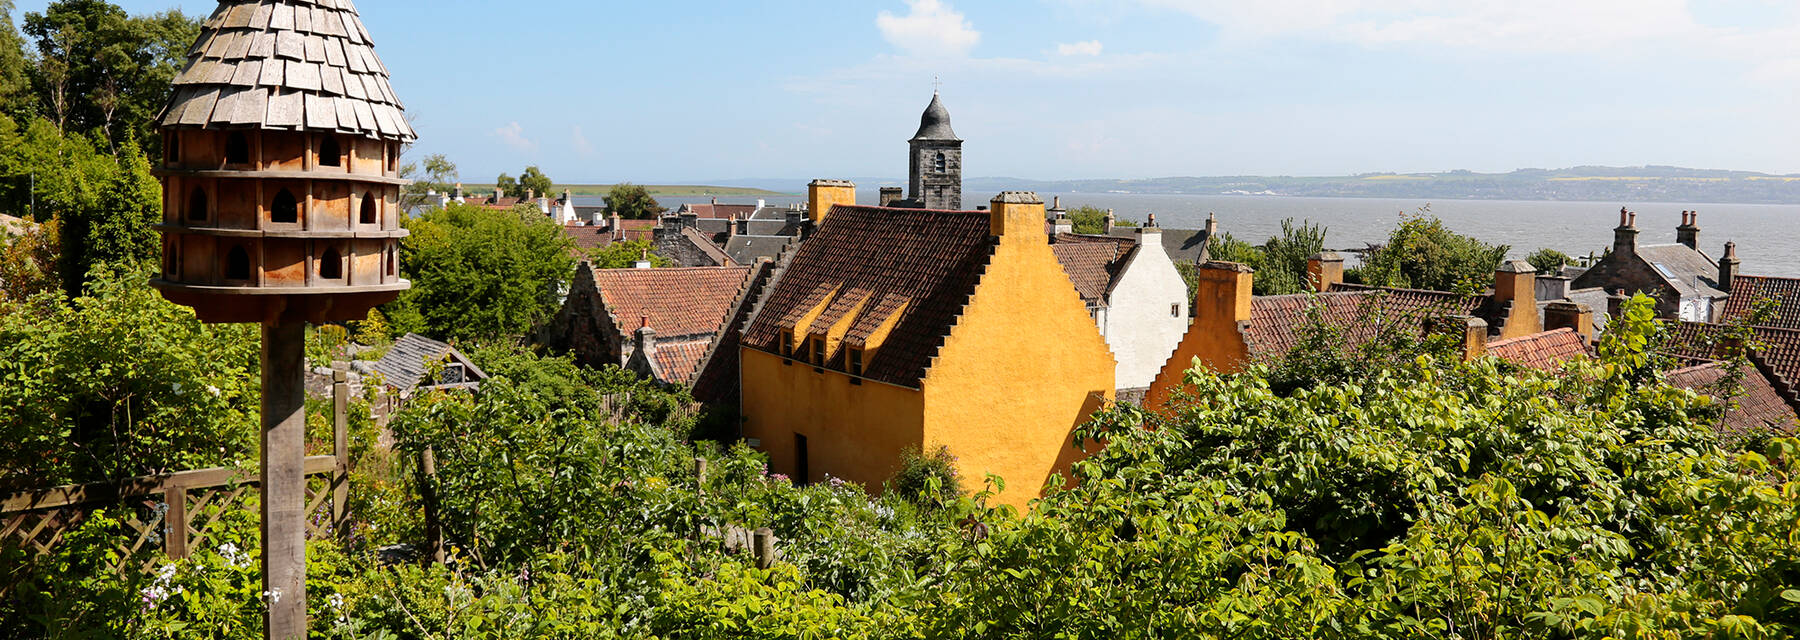 The palace gardens at the Royal Burgh of Culross 